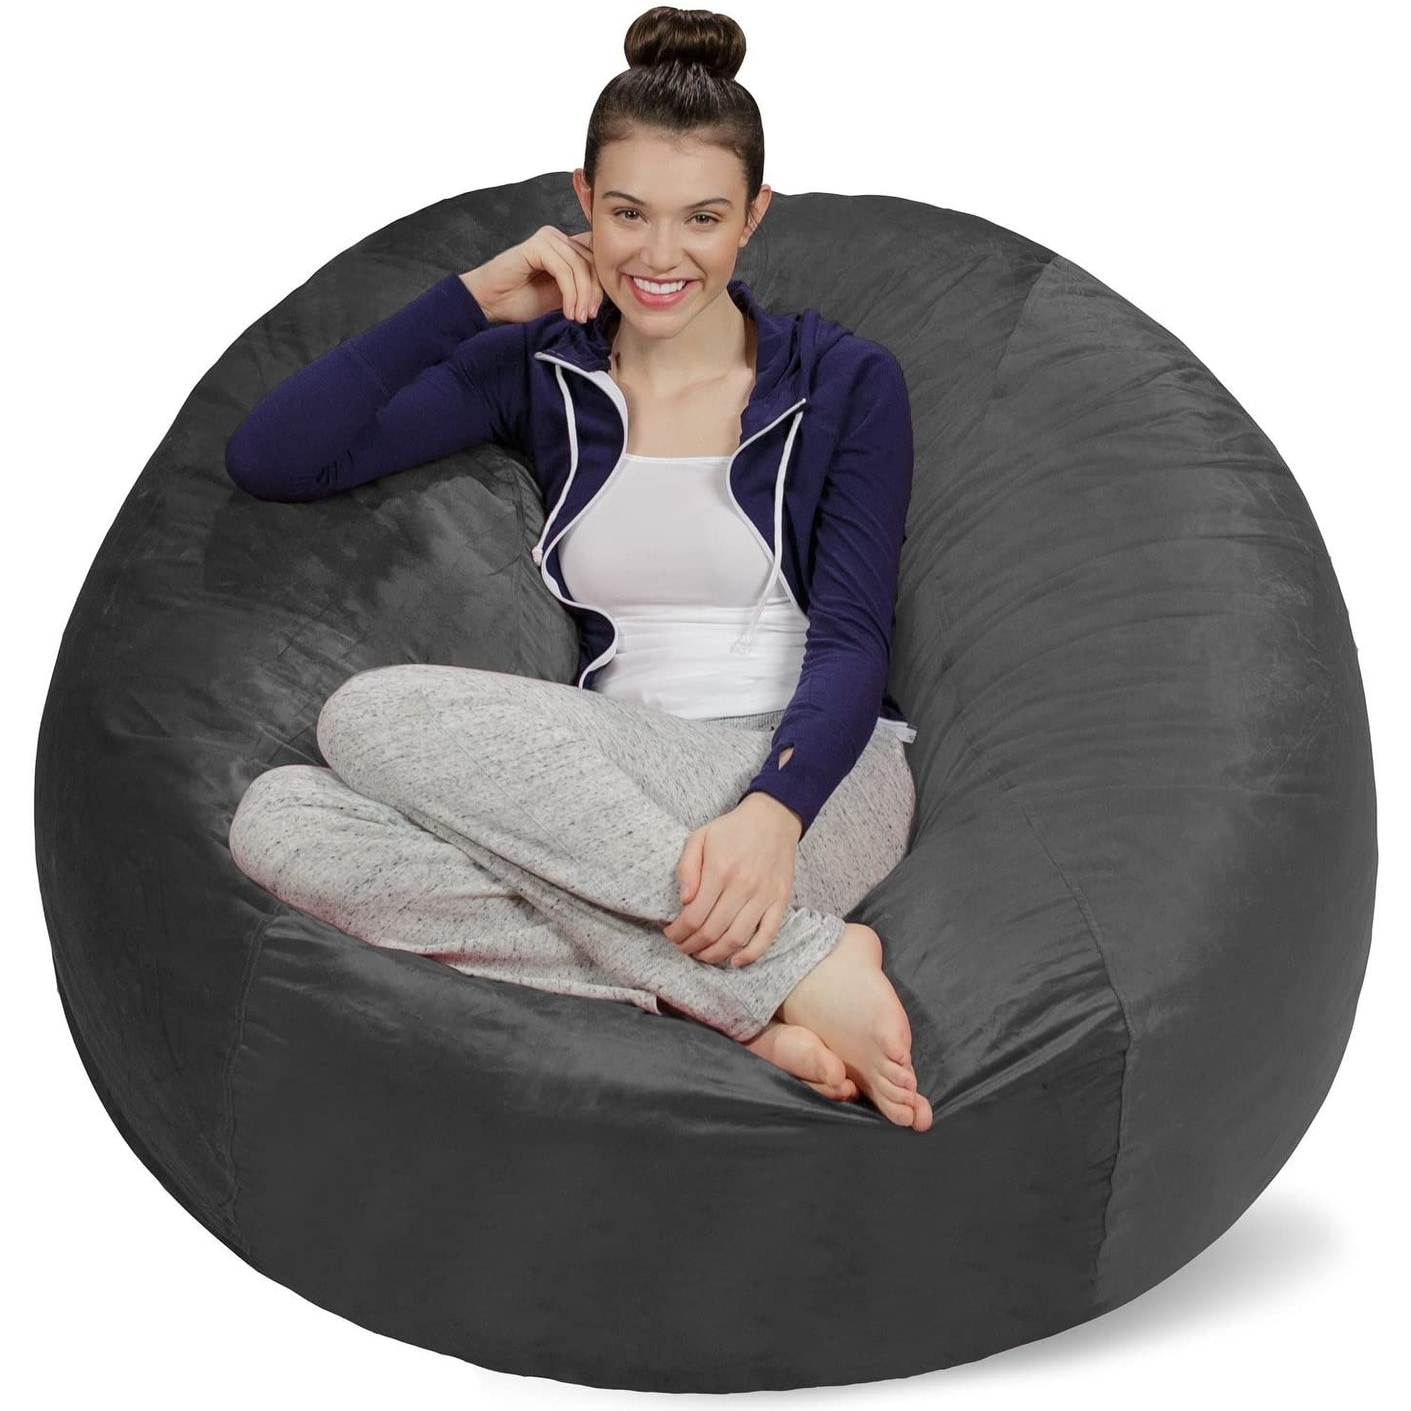 https://ak1.ostkcdn.com/images/products/is/images/direct/1f947e976d865b4b49b2205d665ba6446b1f9f04/Sofa-Sack-5-foot-Bean-Bag-Chair-Large-Memory-Foam-Bean-Bag.jpg